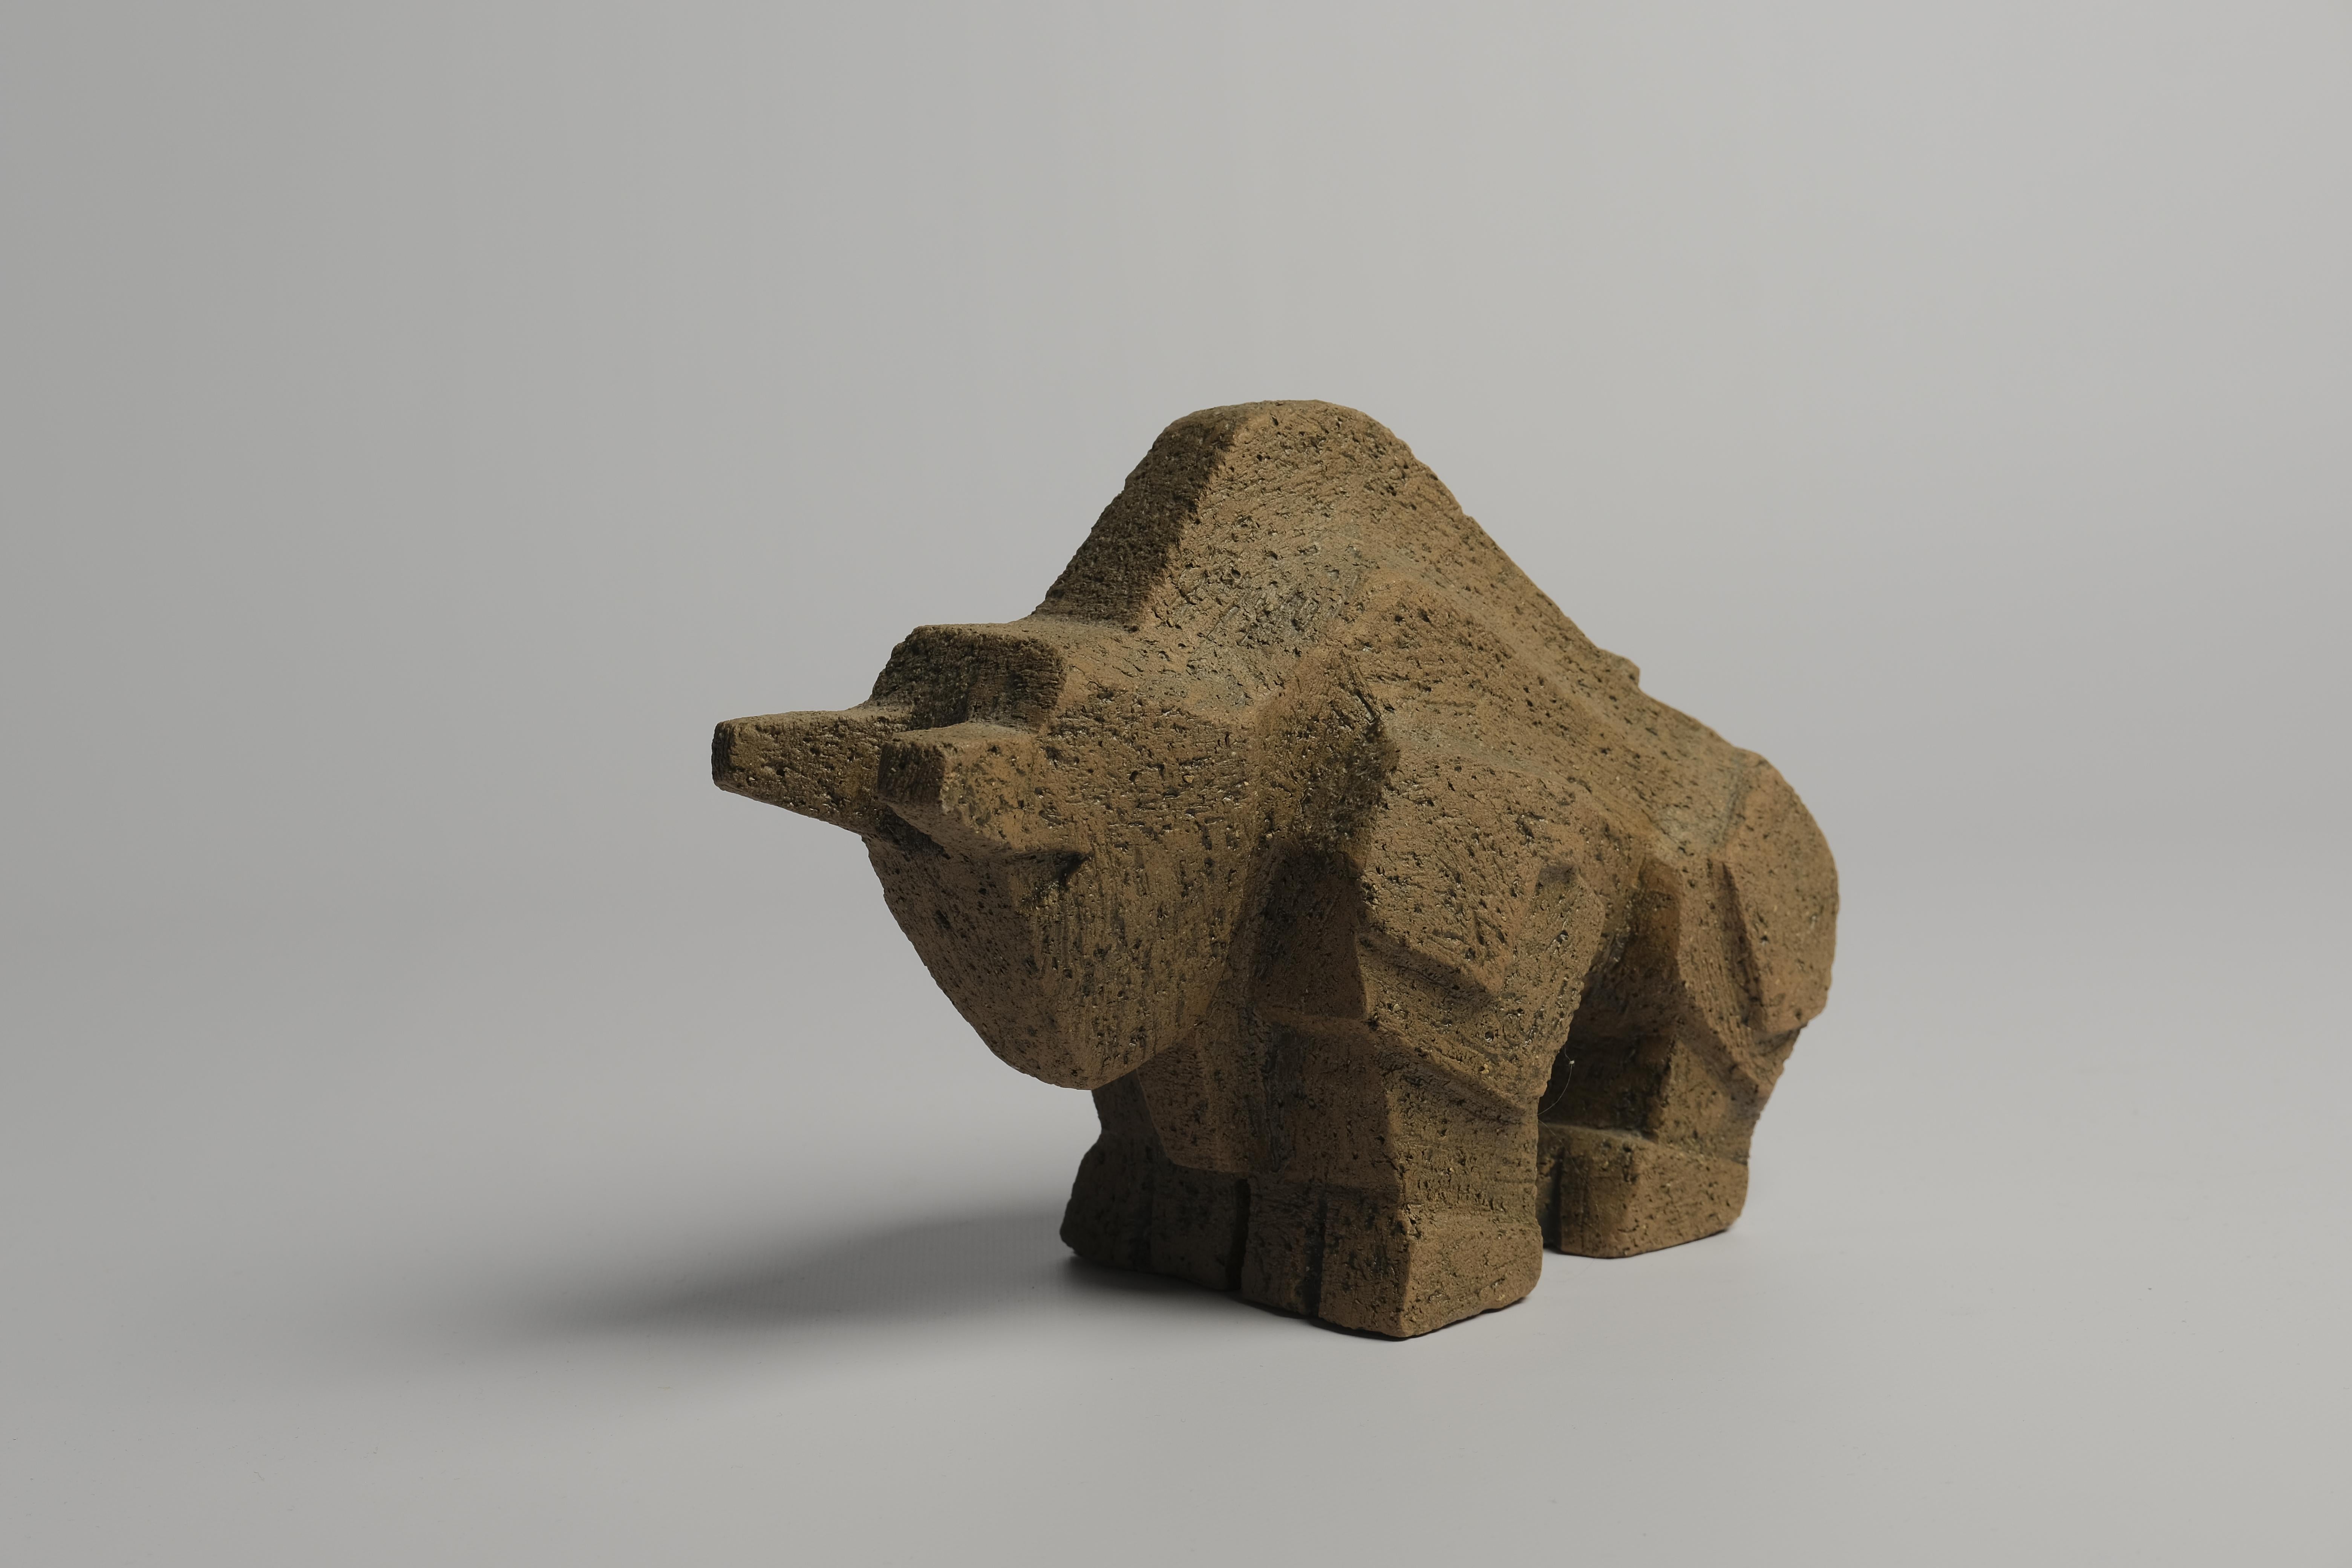 Striking brutalist style stoneware bull made by Lars Pagfeldt (1924-2001) for Pagfeldt Stengods, Sweden 1960s. Raw and rugged unglazed surface meets strong and brutal lines. Marked 55/100.